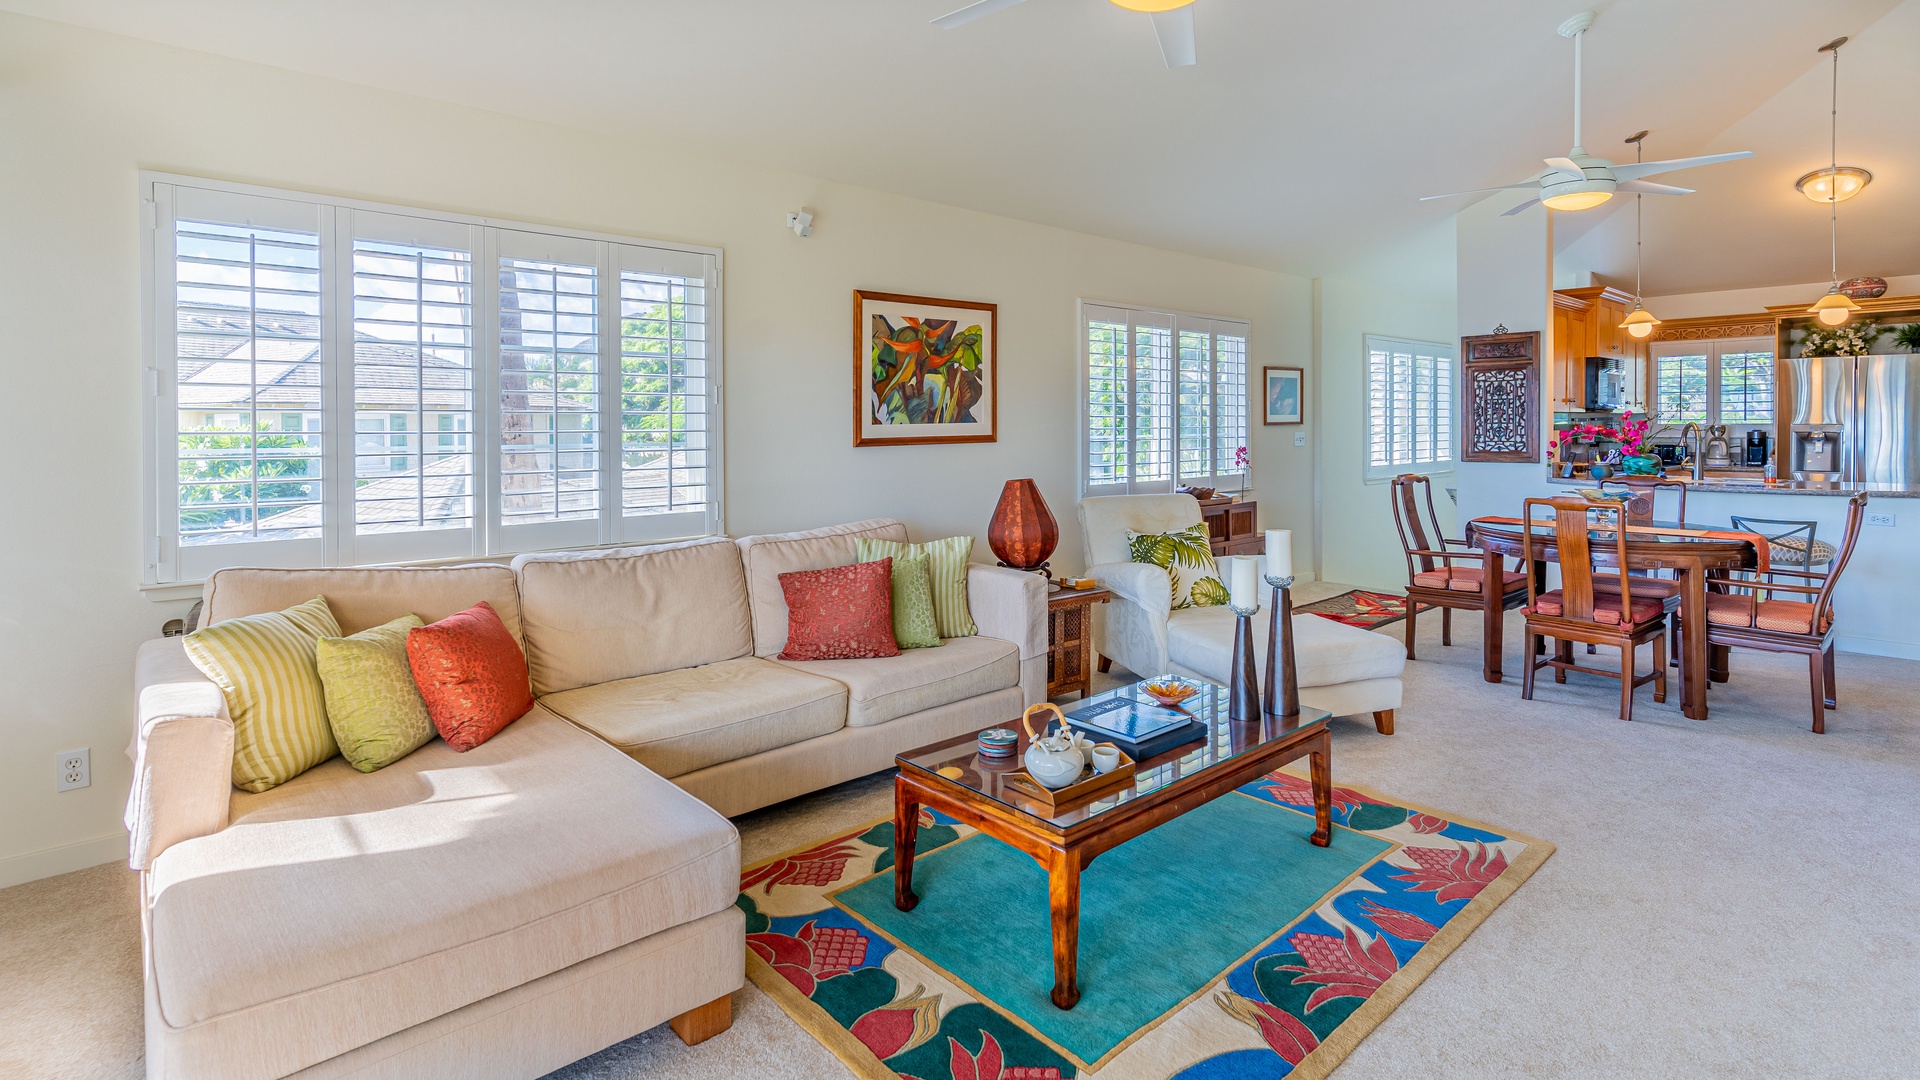 Kapolei Vacation Rentals, Kai Lani 16C - Sink into the plush seating in the living area surrounded by colorful accents.